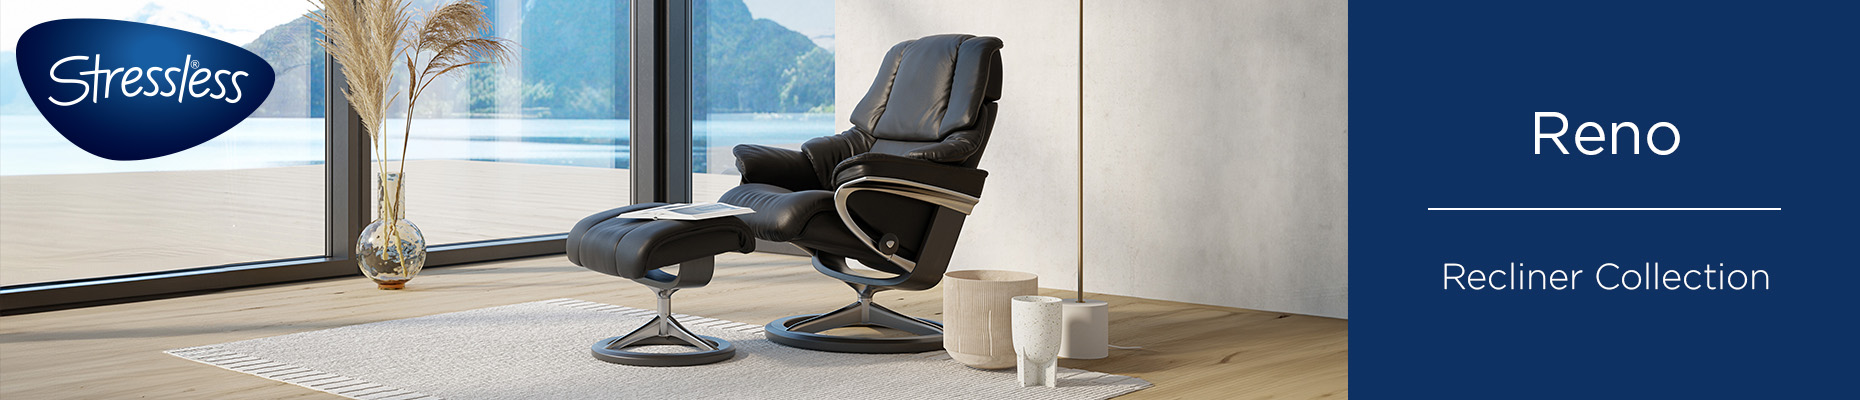 Reno Recliner Collection at Forrest Furnishing